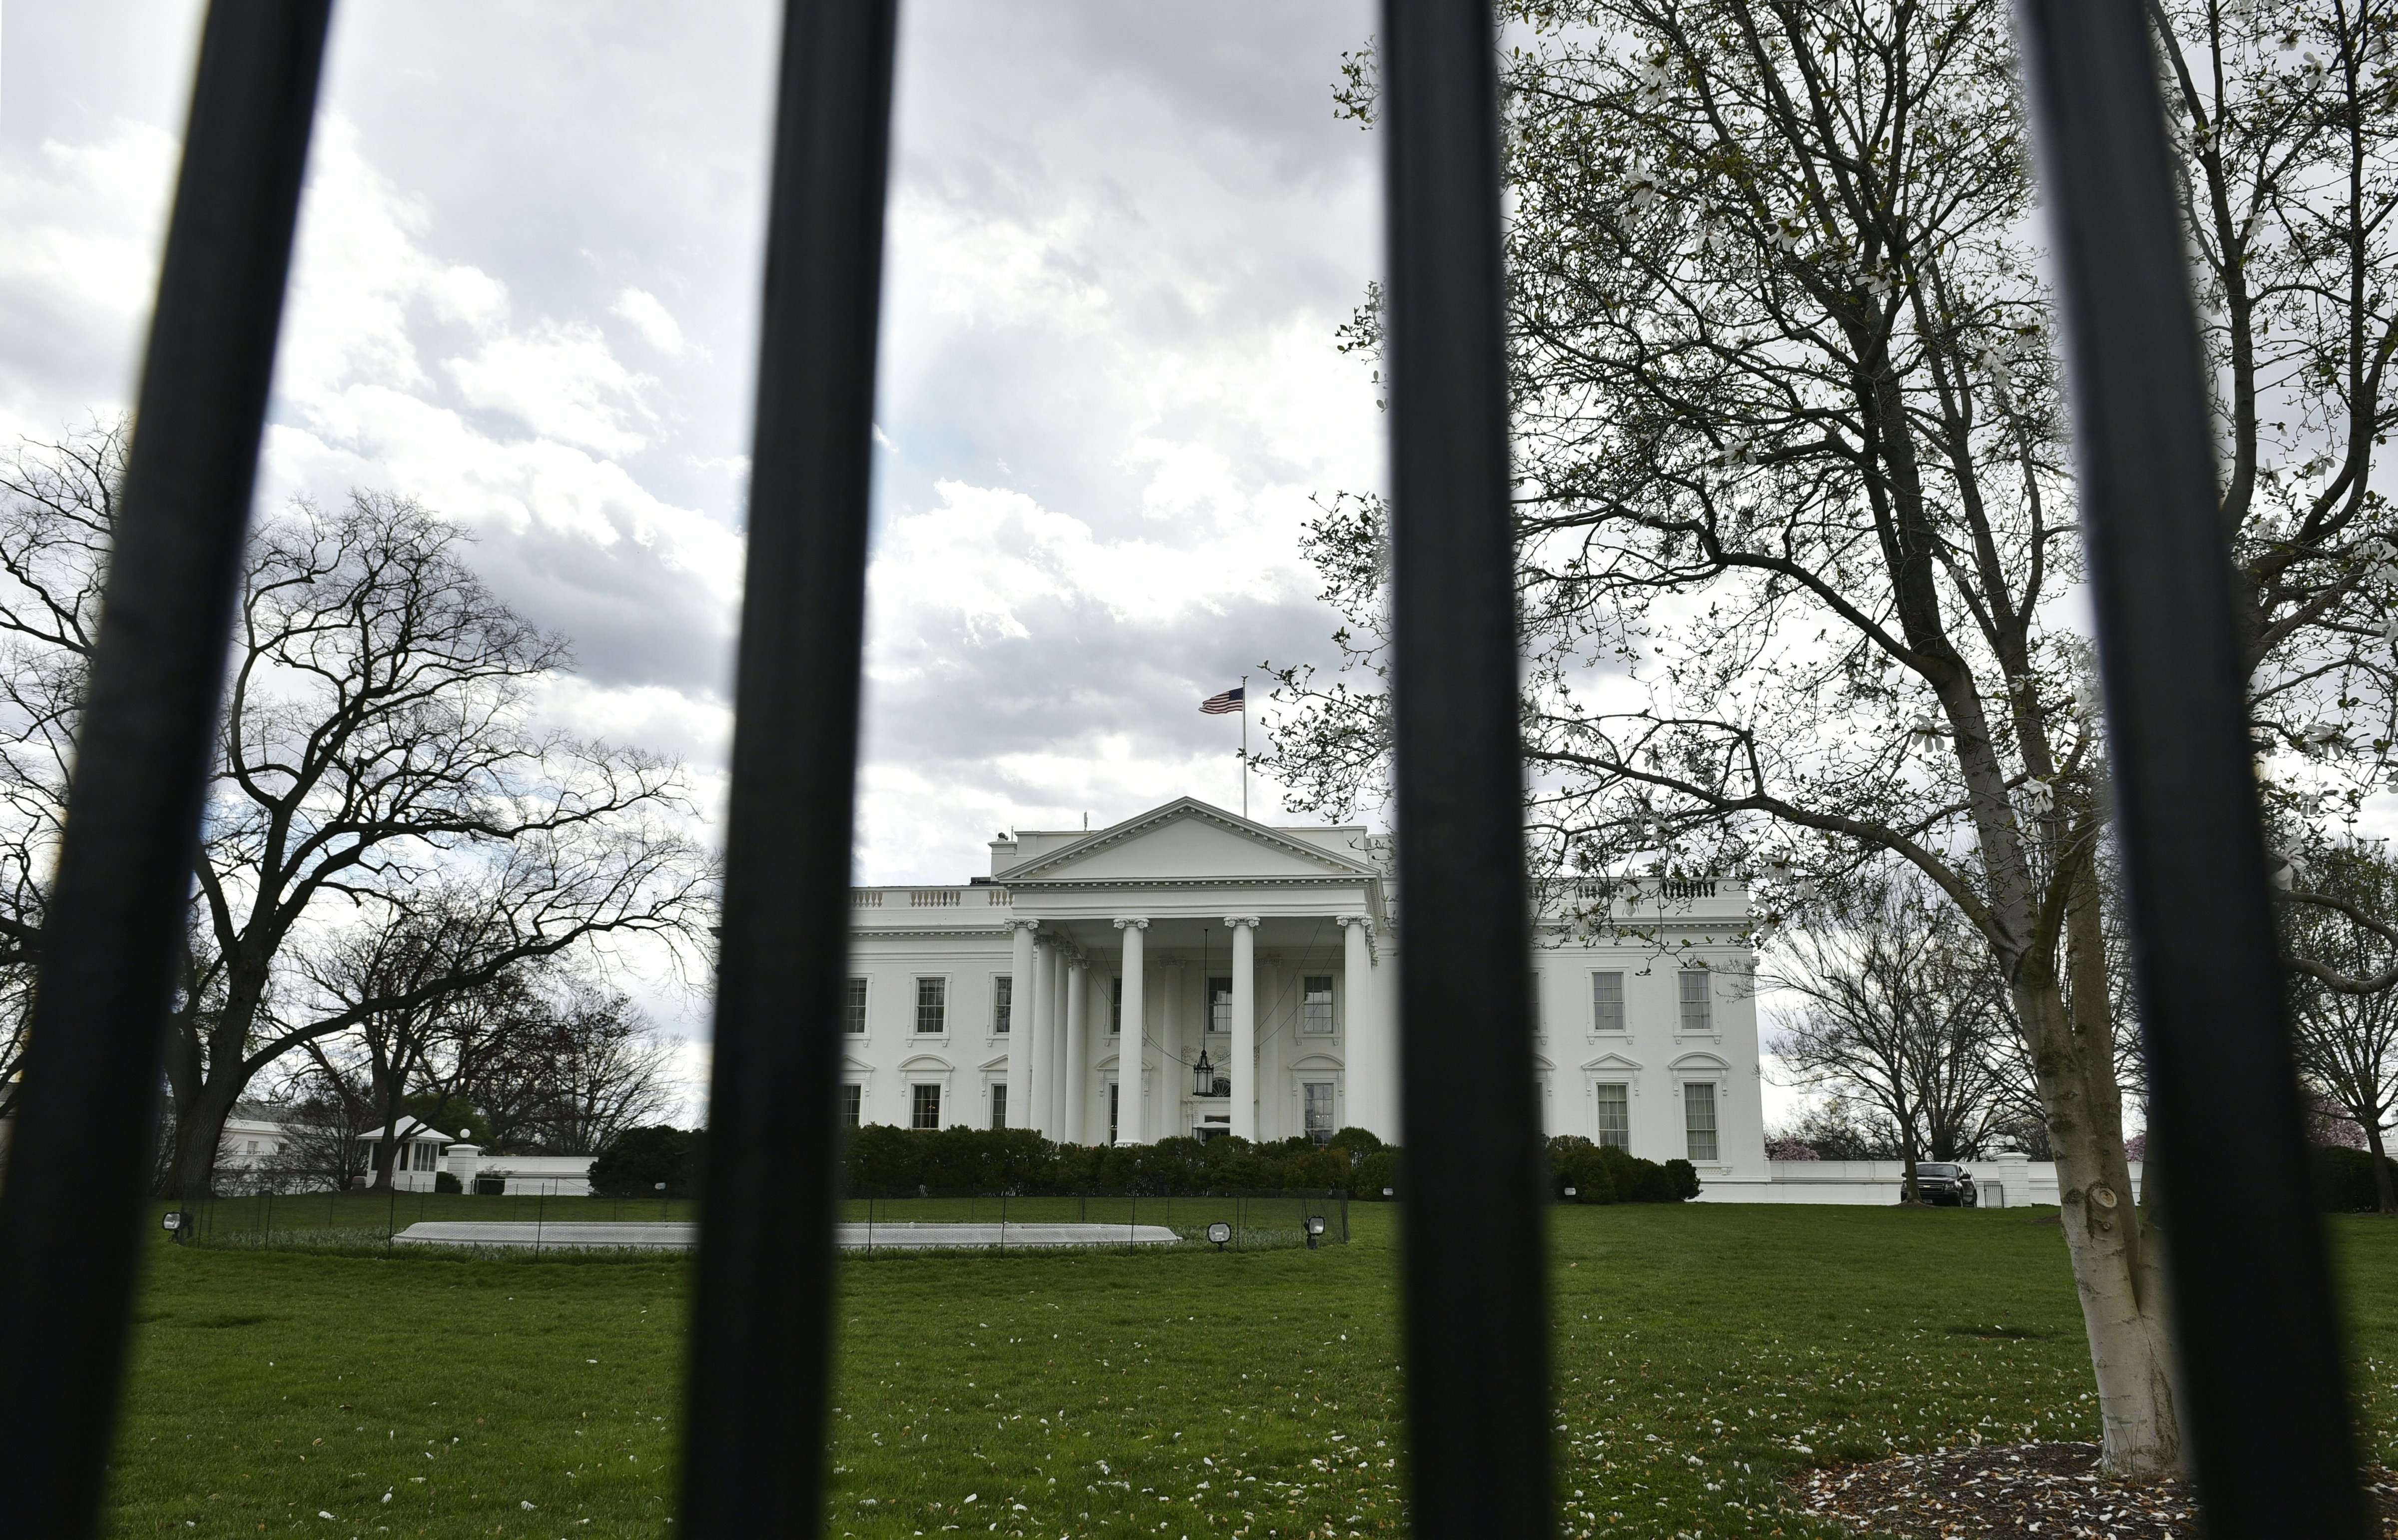 The White House is seen through the fence on March 17 in Washington, DC. (Mandel Ngan—AFP/Getty Images)